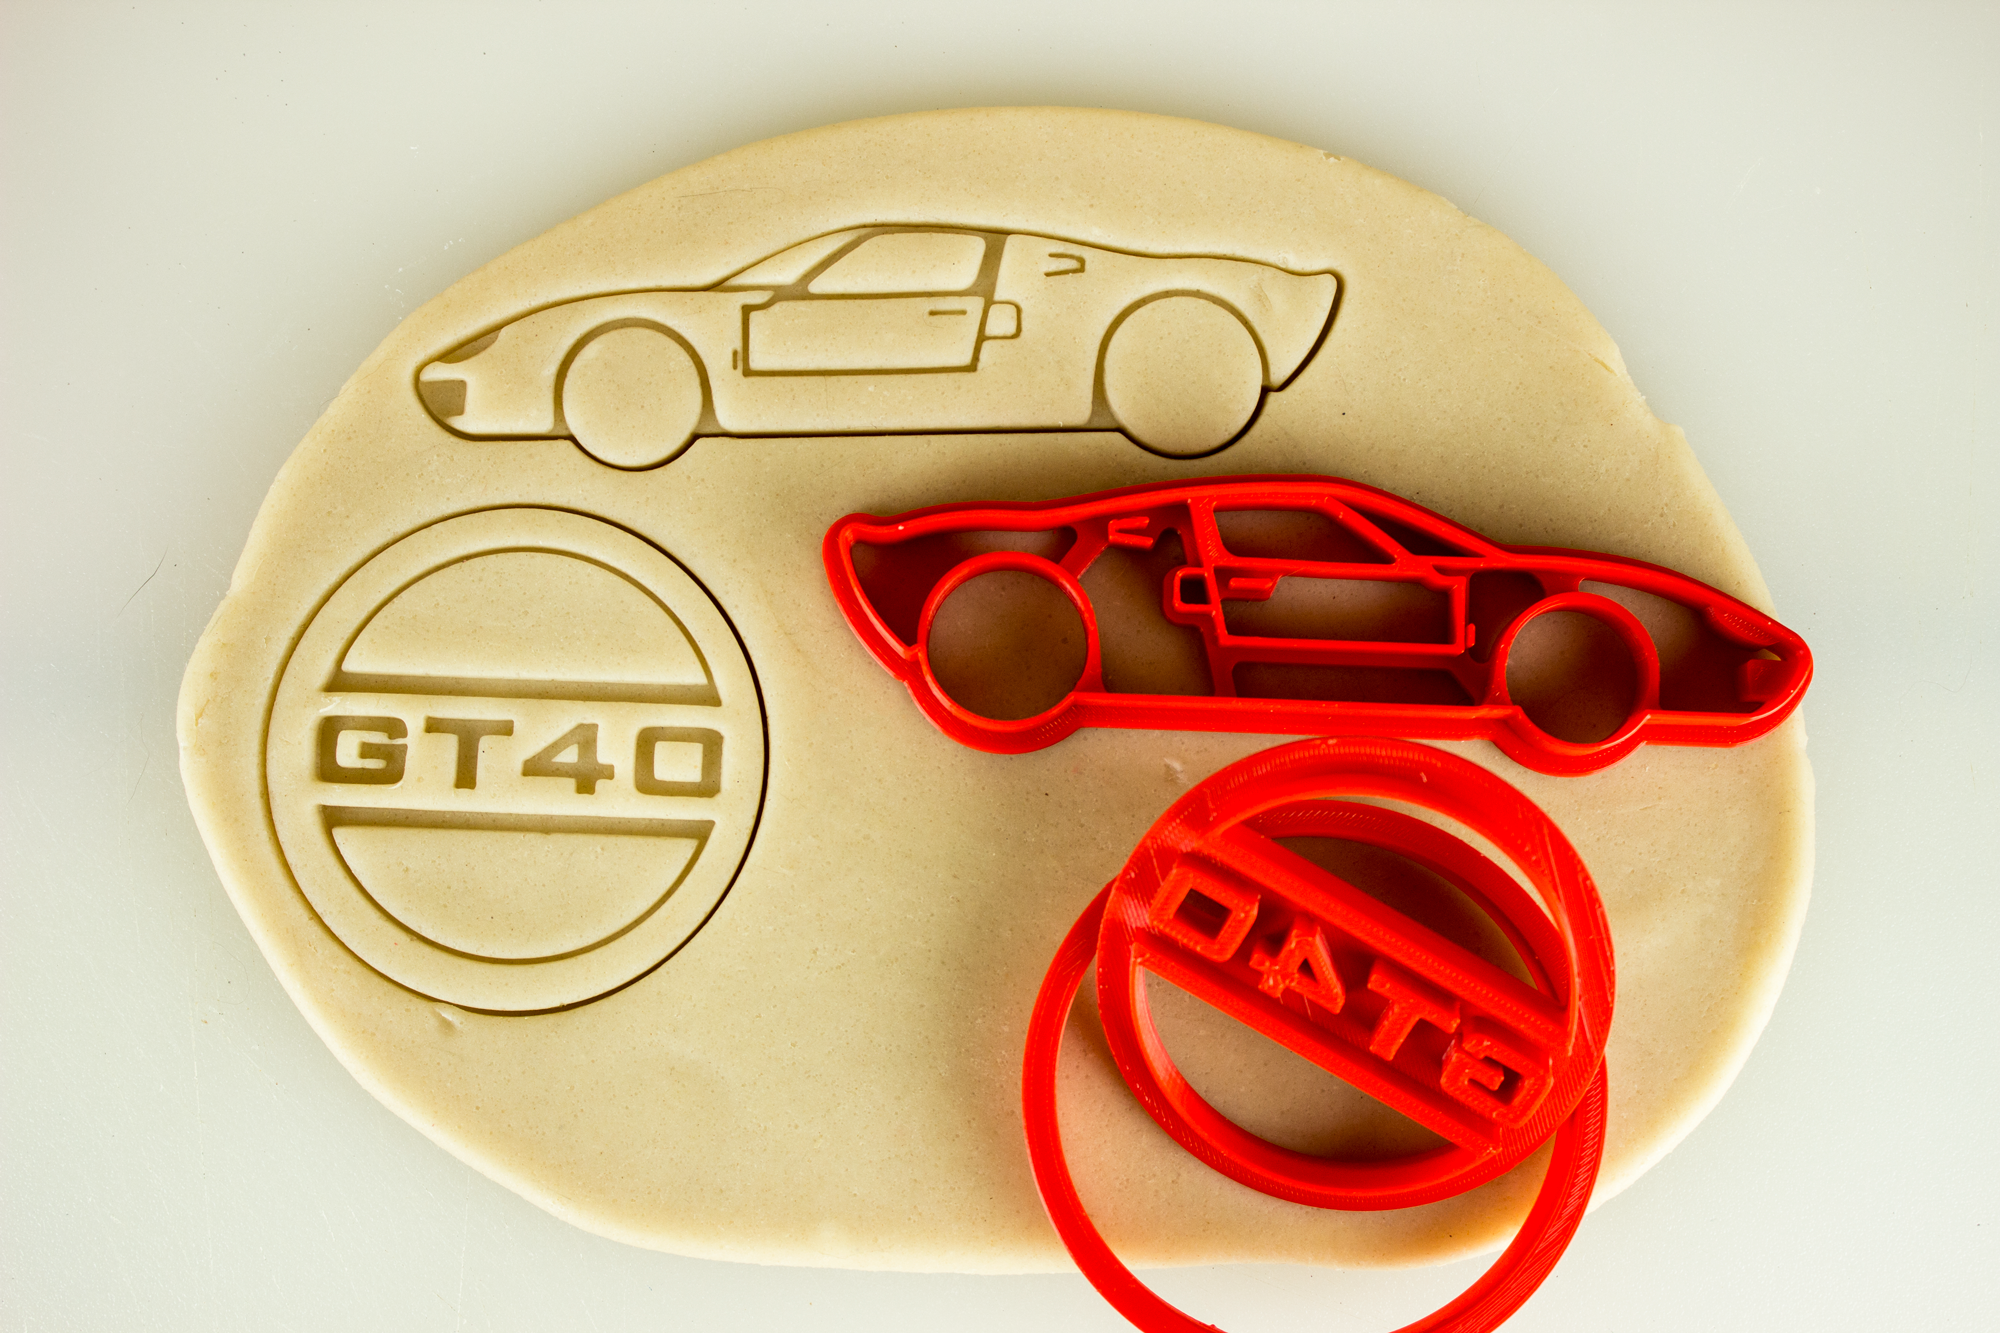 ford-gt40-cookie-cutter-set_1024x1024@2x.png